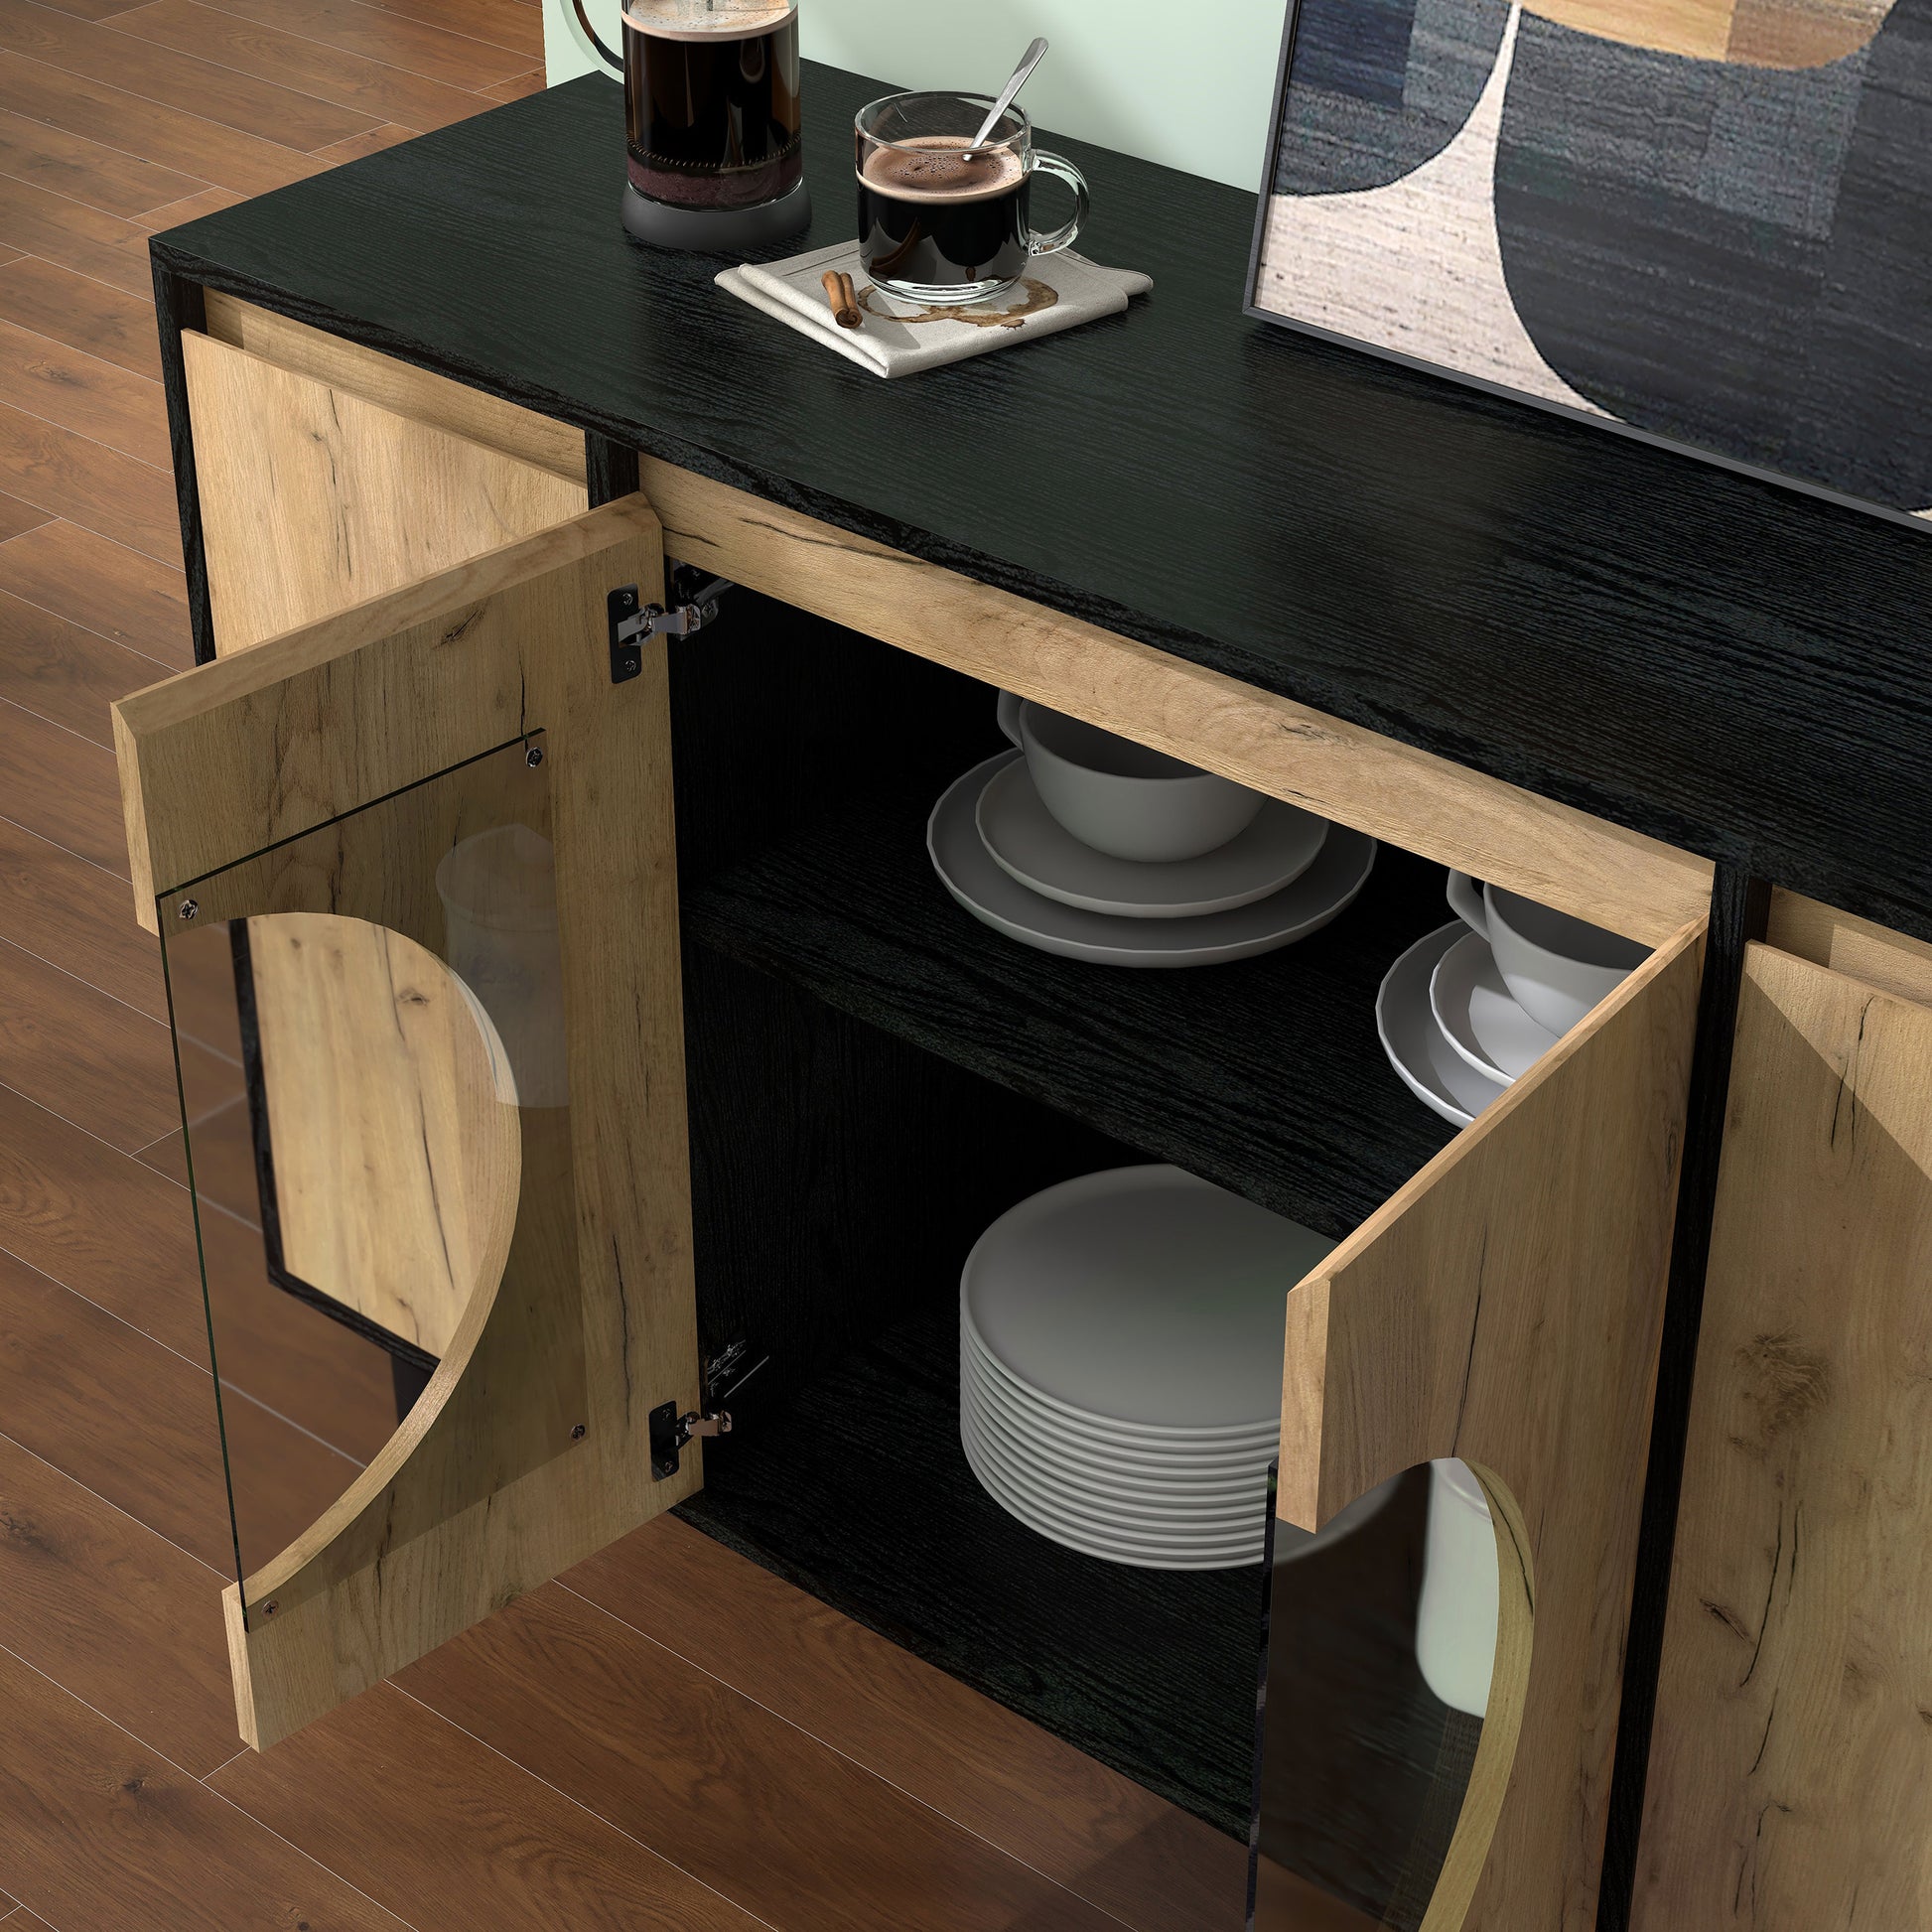 Left angled bird's eye close-up door view of a modern light oak and black six-shelf buffet with center doors open in a living area with accessories